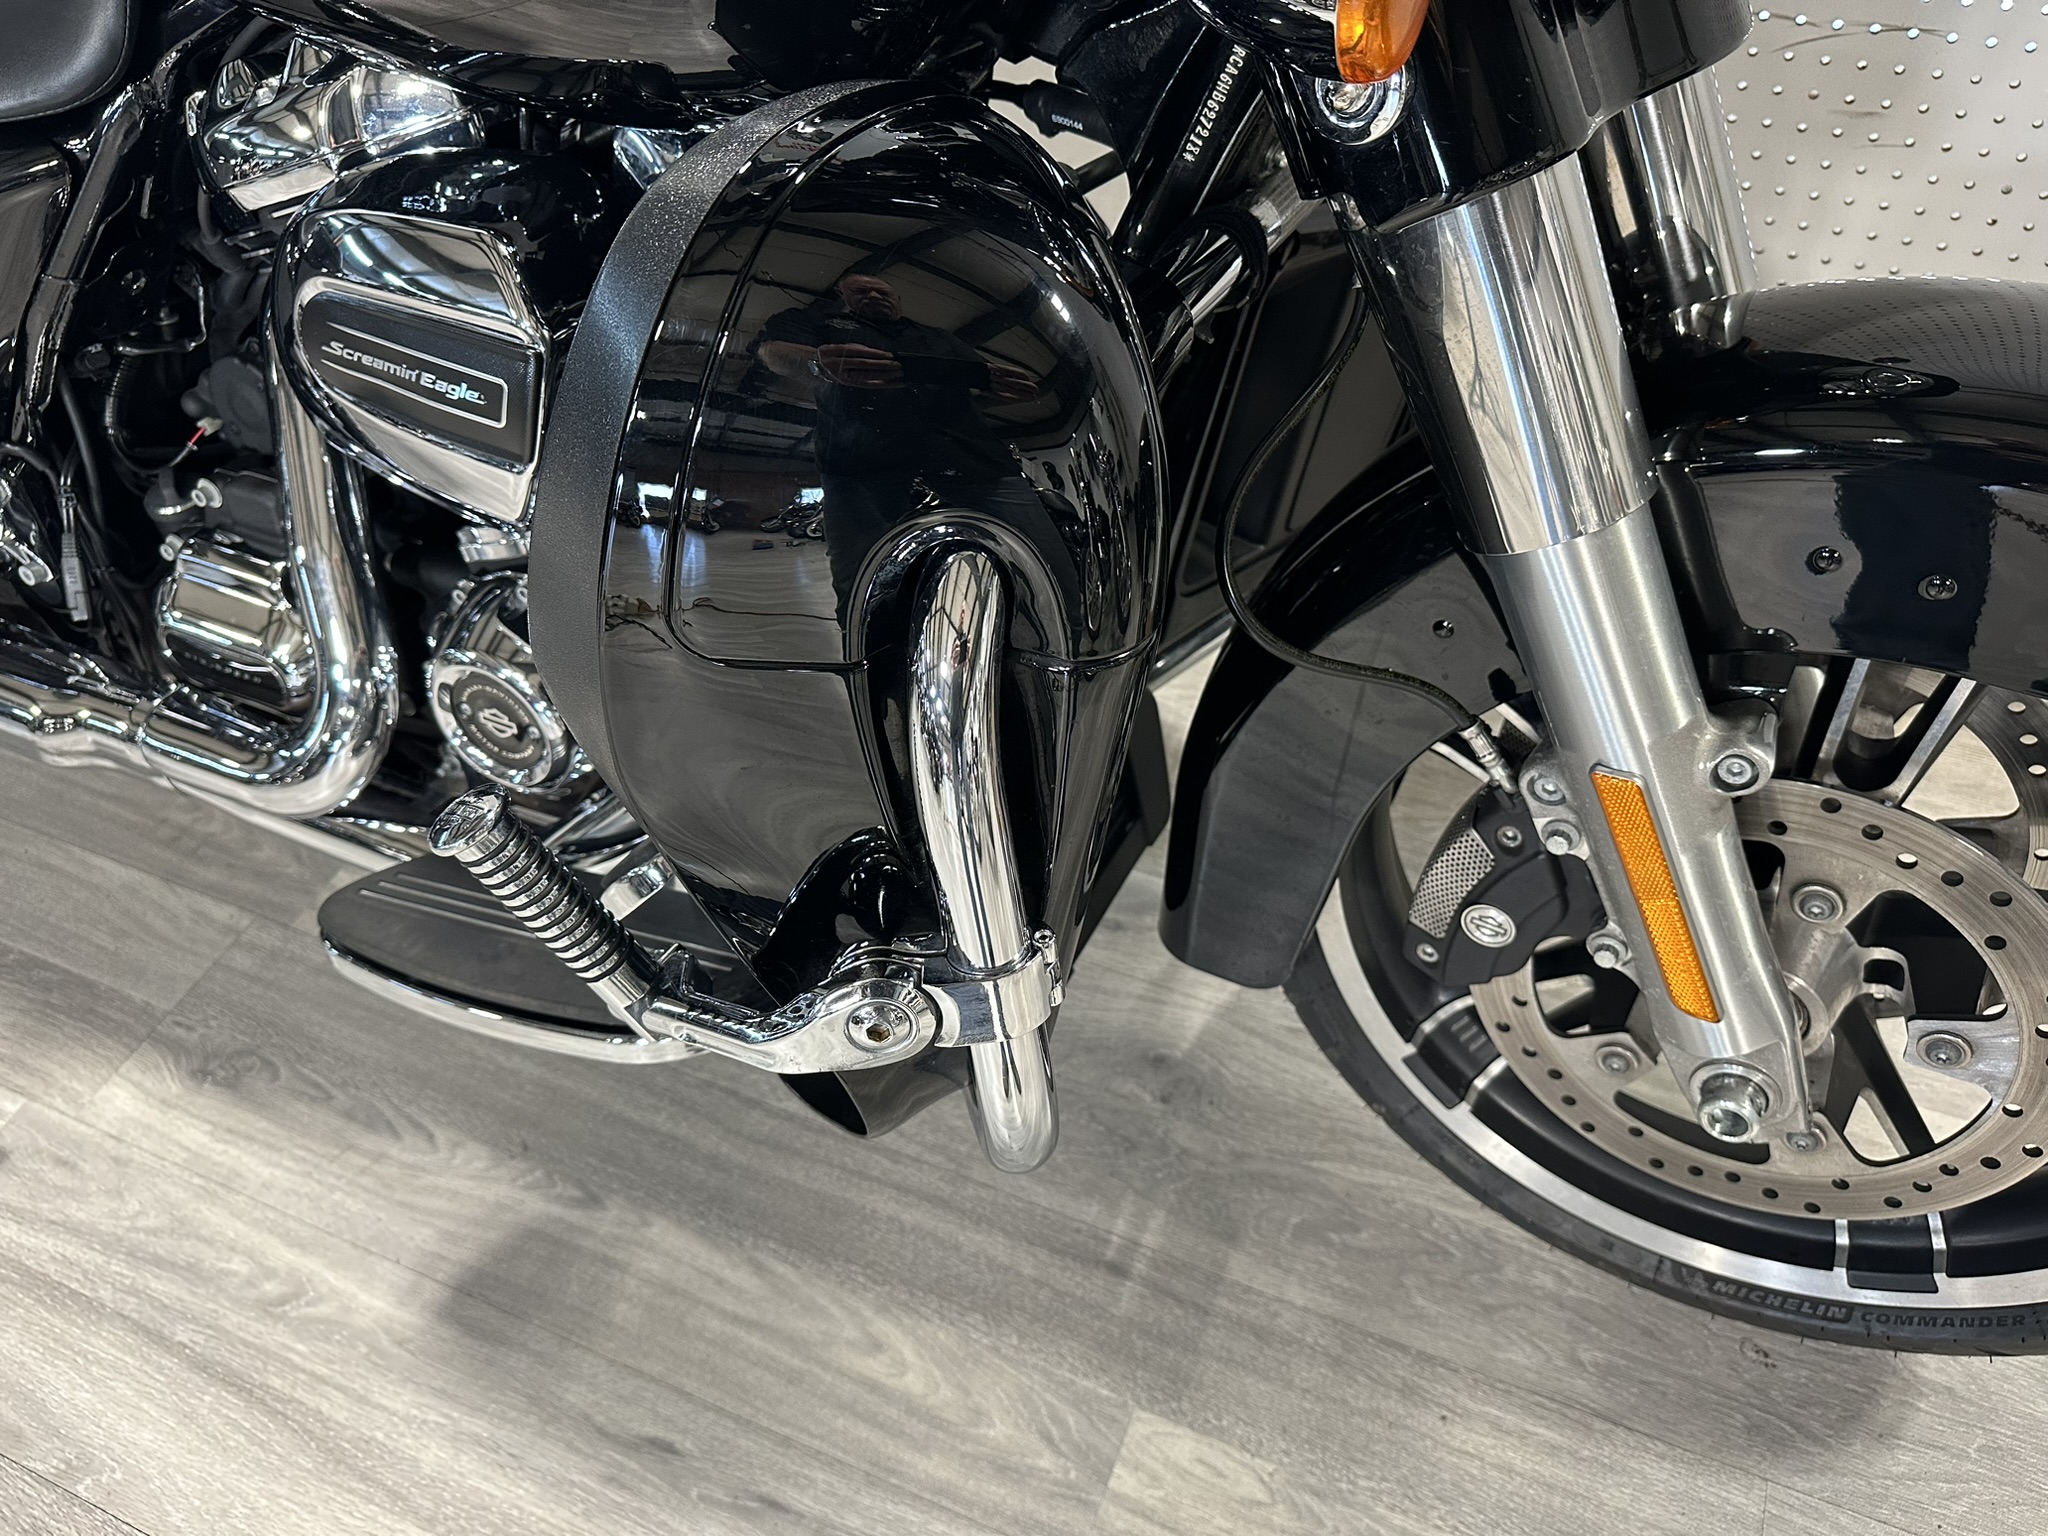 HARLEY DAVIDSON STREET GLIDE SPECIAL FOR SALE HOGTOWN CYCLES